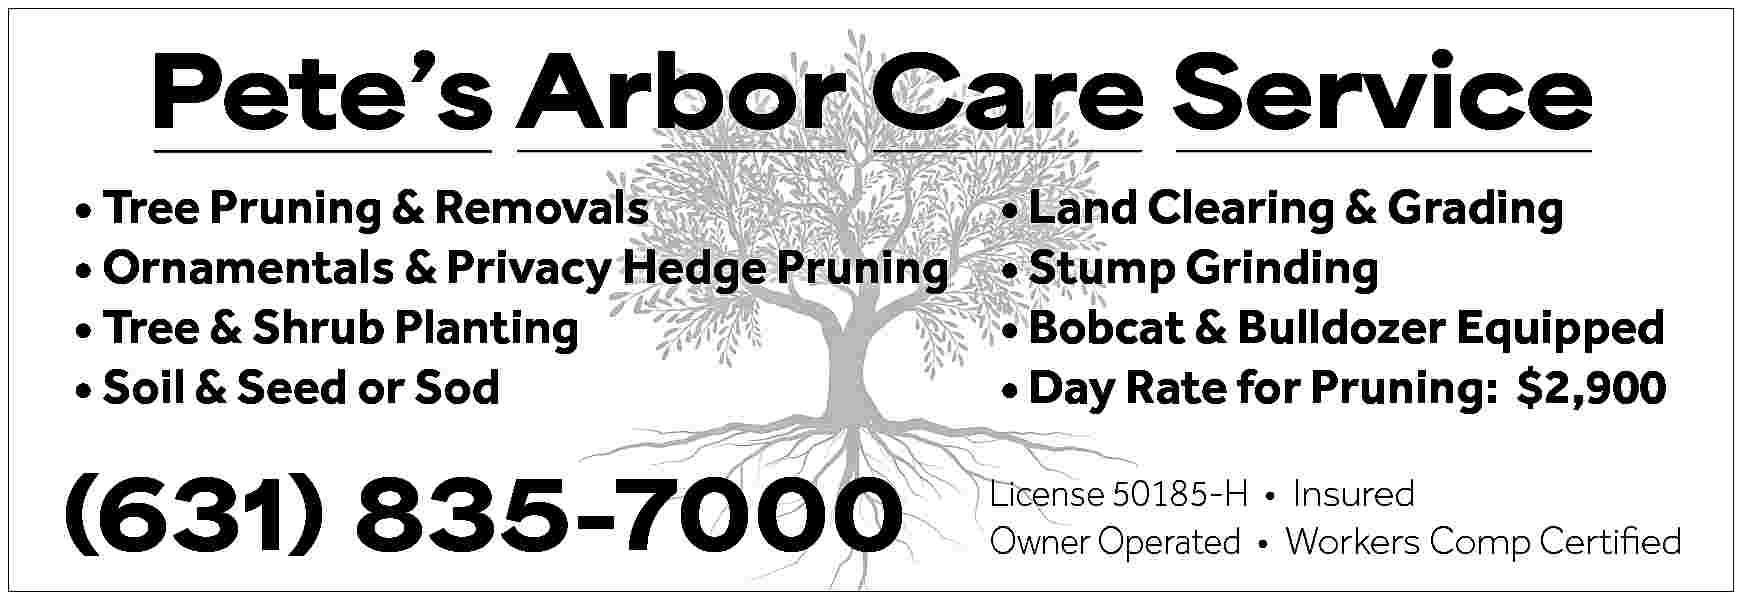 Pete   s Arbor  Pete   s Arbor Care Service      Tree Pruning & Removals      Ornamentals & Privacy Hedge Pruning      Tree & Shrub Planting      Soil & Seed or Sod    (631) 835-7000        Land Clearing & Grading      Stump Grinding      Bobcat & Bulldozer Equipped      Day Rate for Pruning: $2,900  License 50185-H     Insured  Owner Operated     Workers Comp Certified     